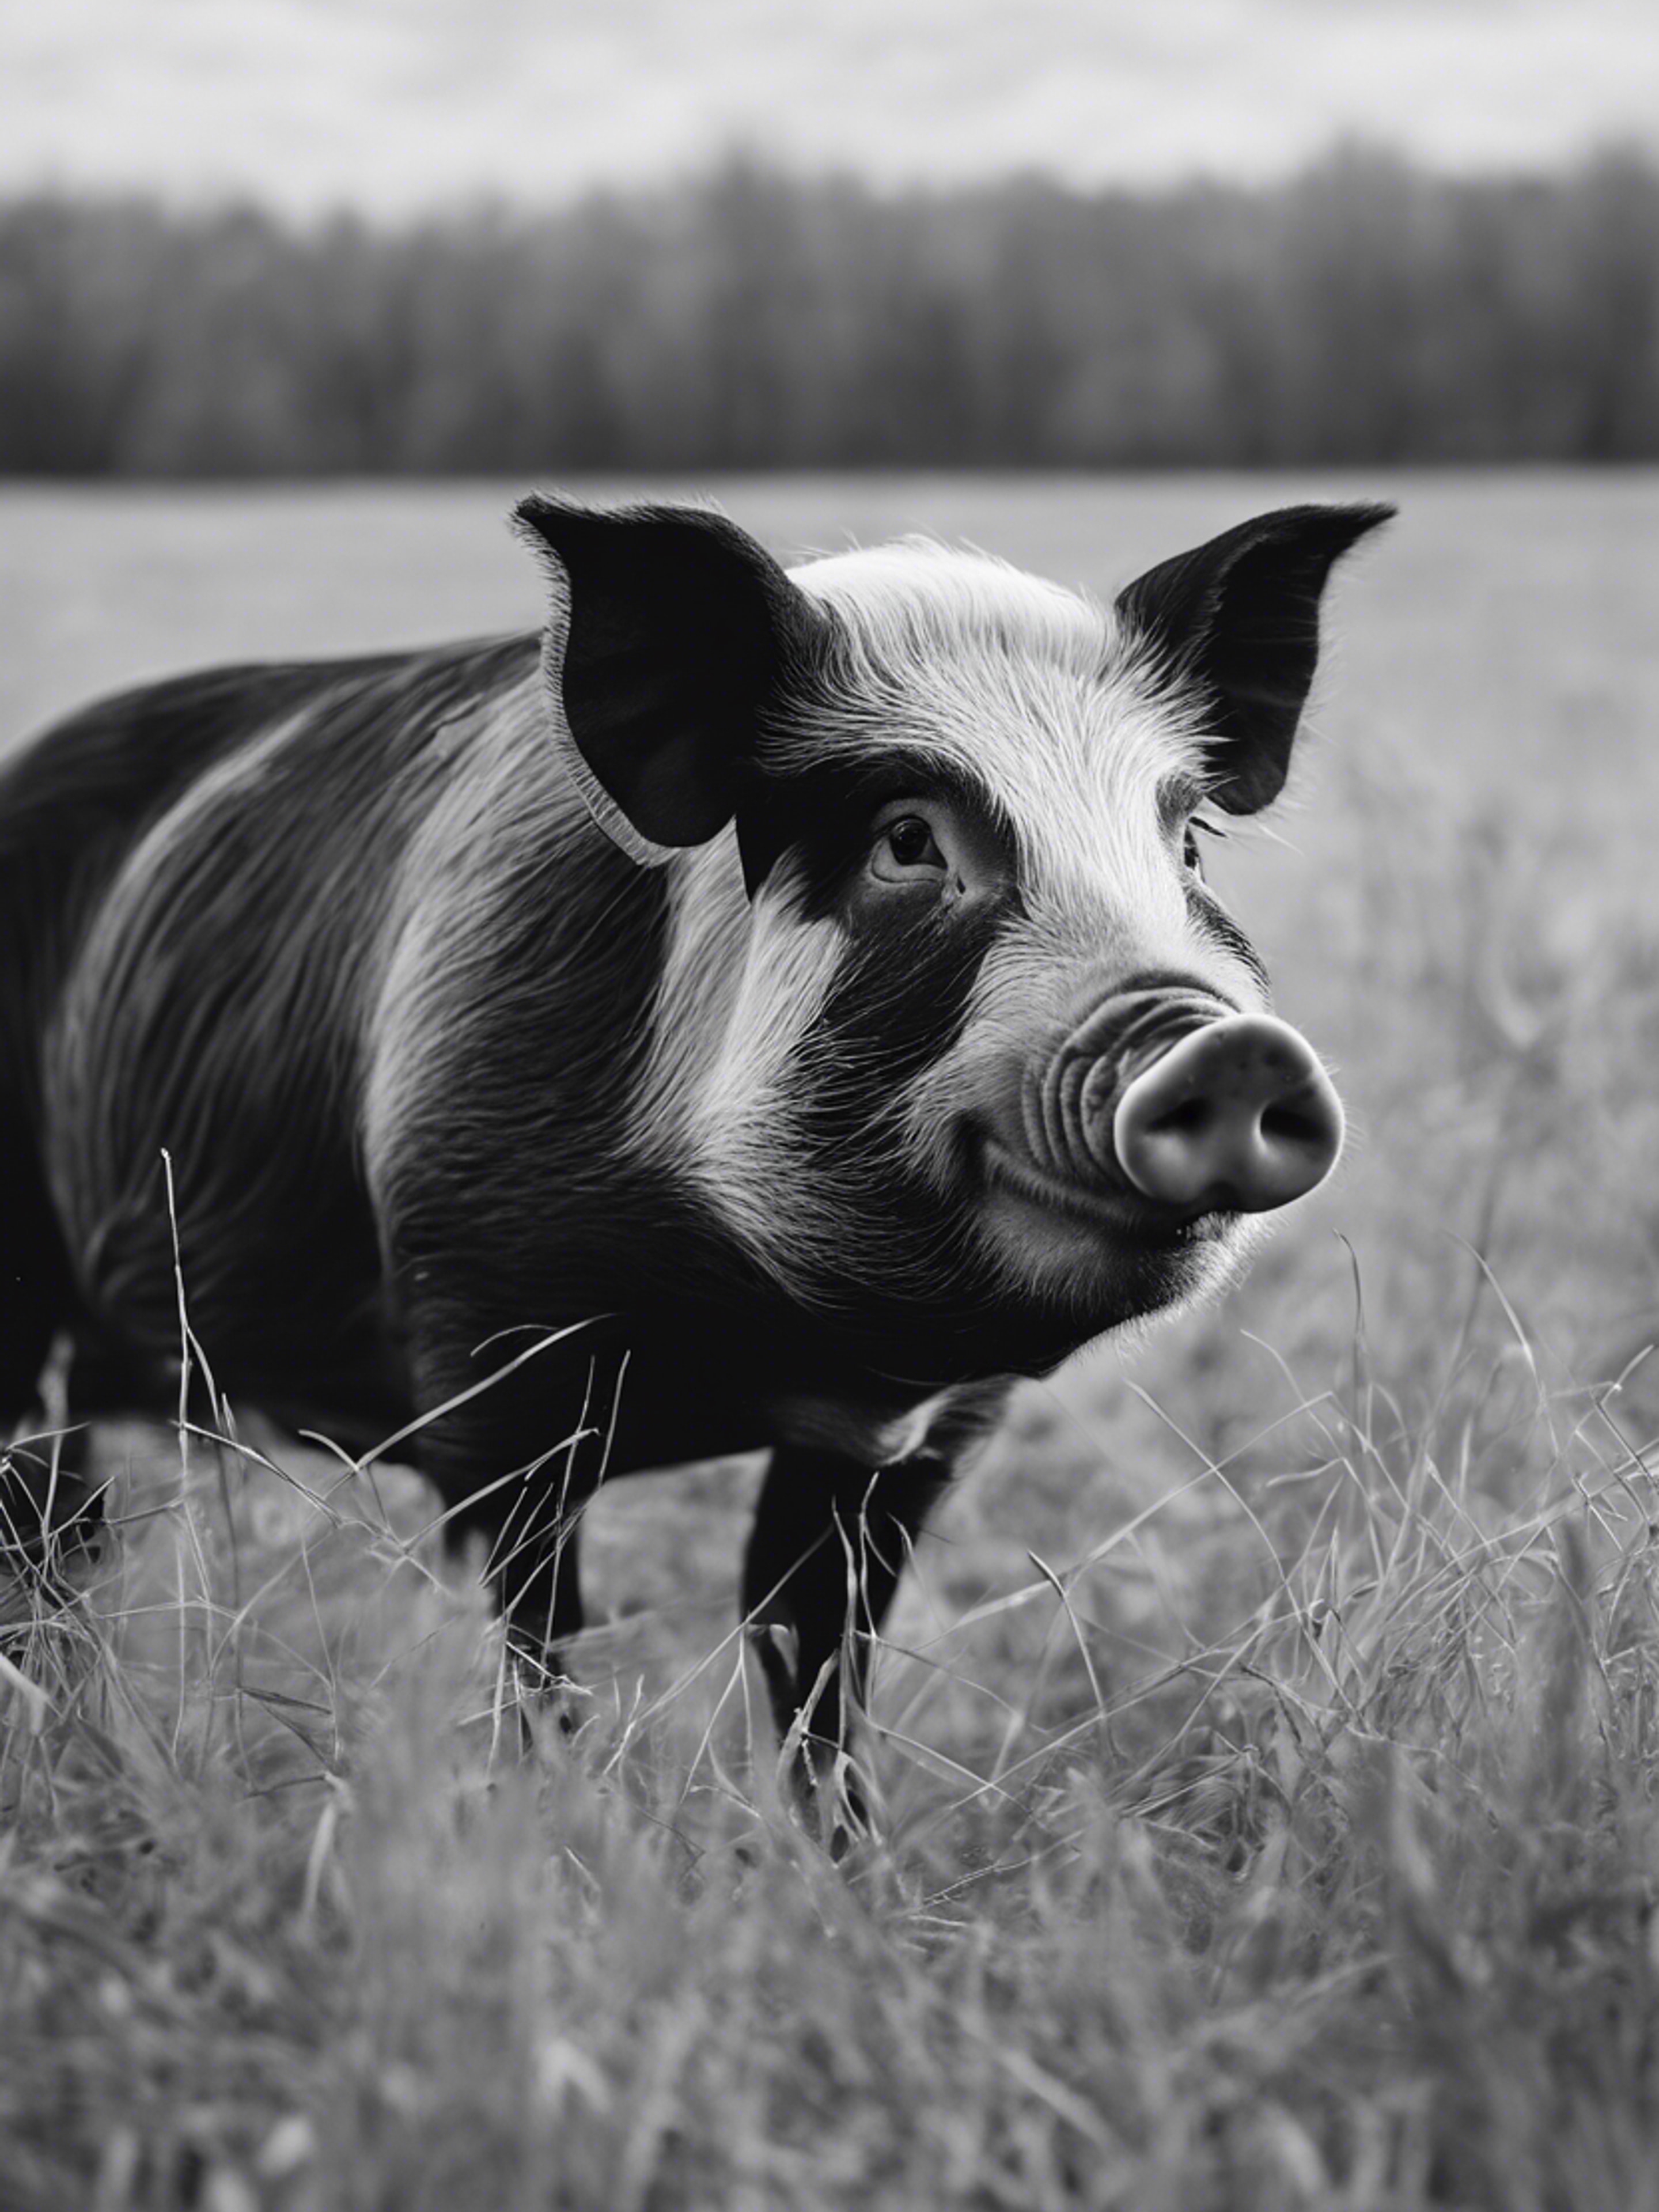 A black and white pig with clean fur, captured in a country meadow during tranquility of winter. Papel de parede[700eb497dc0e43a8b530]